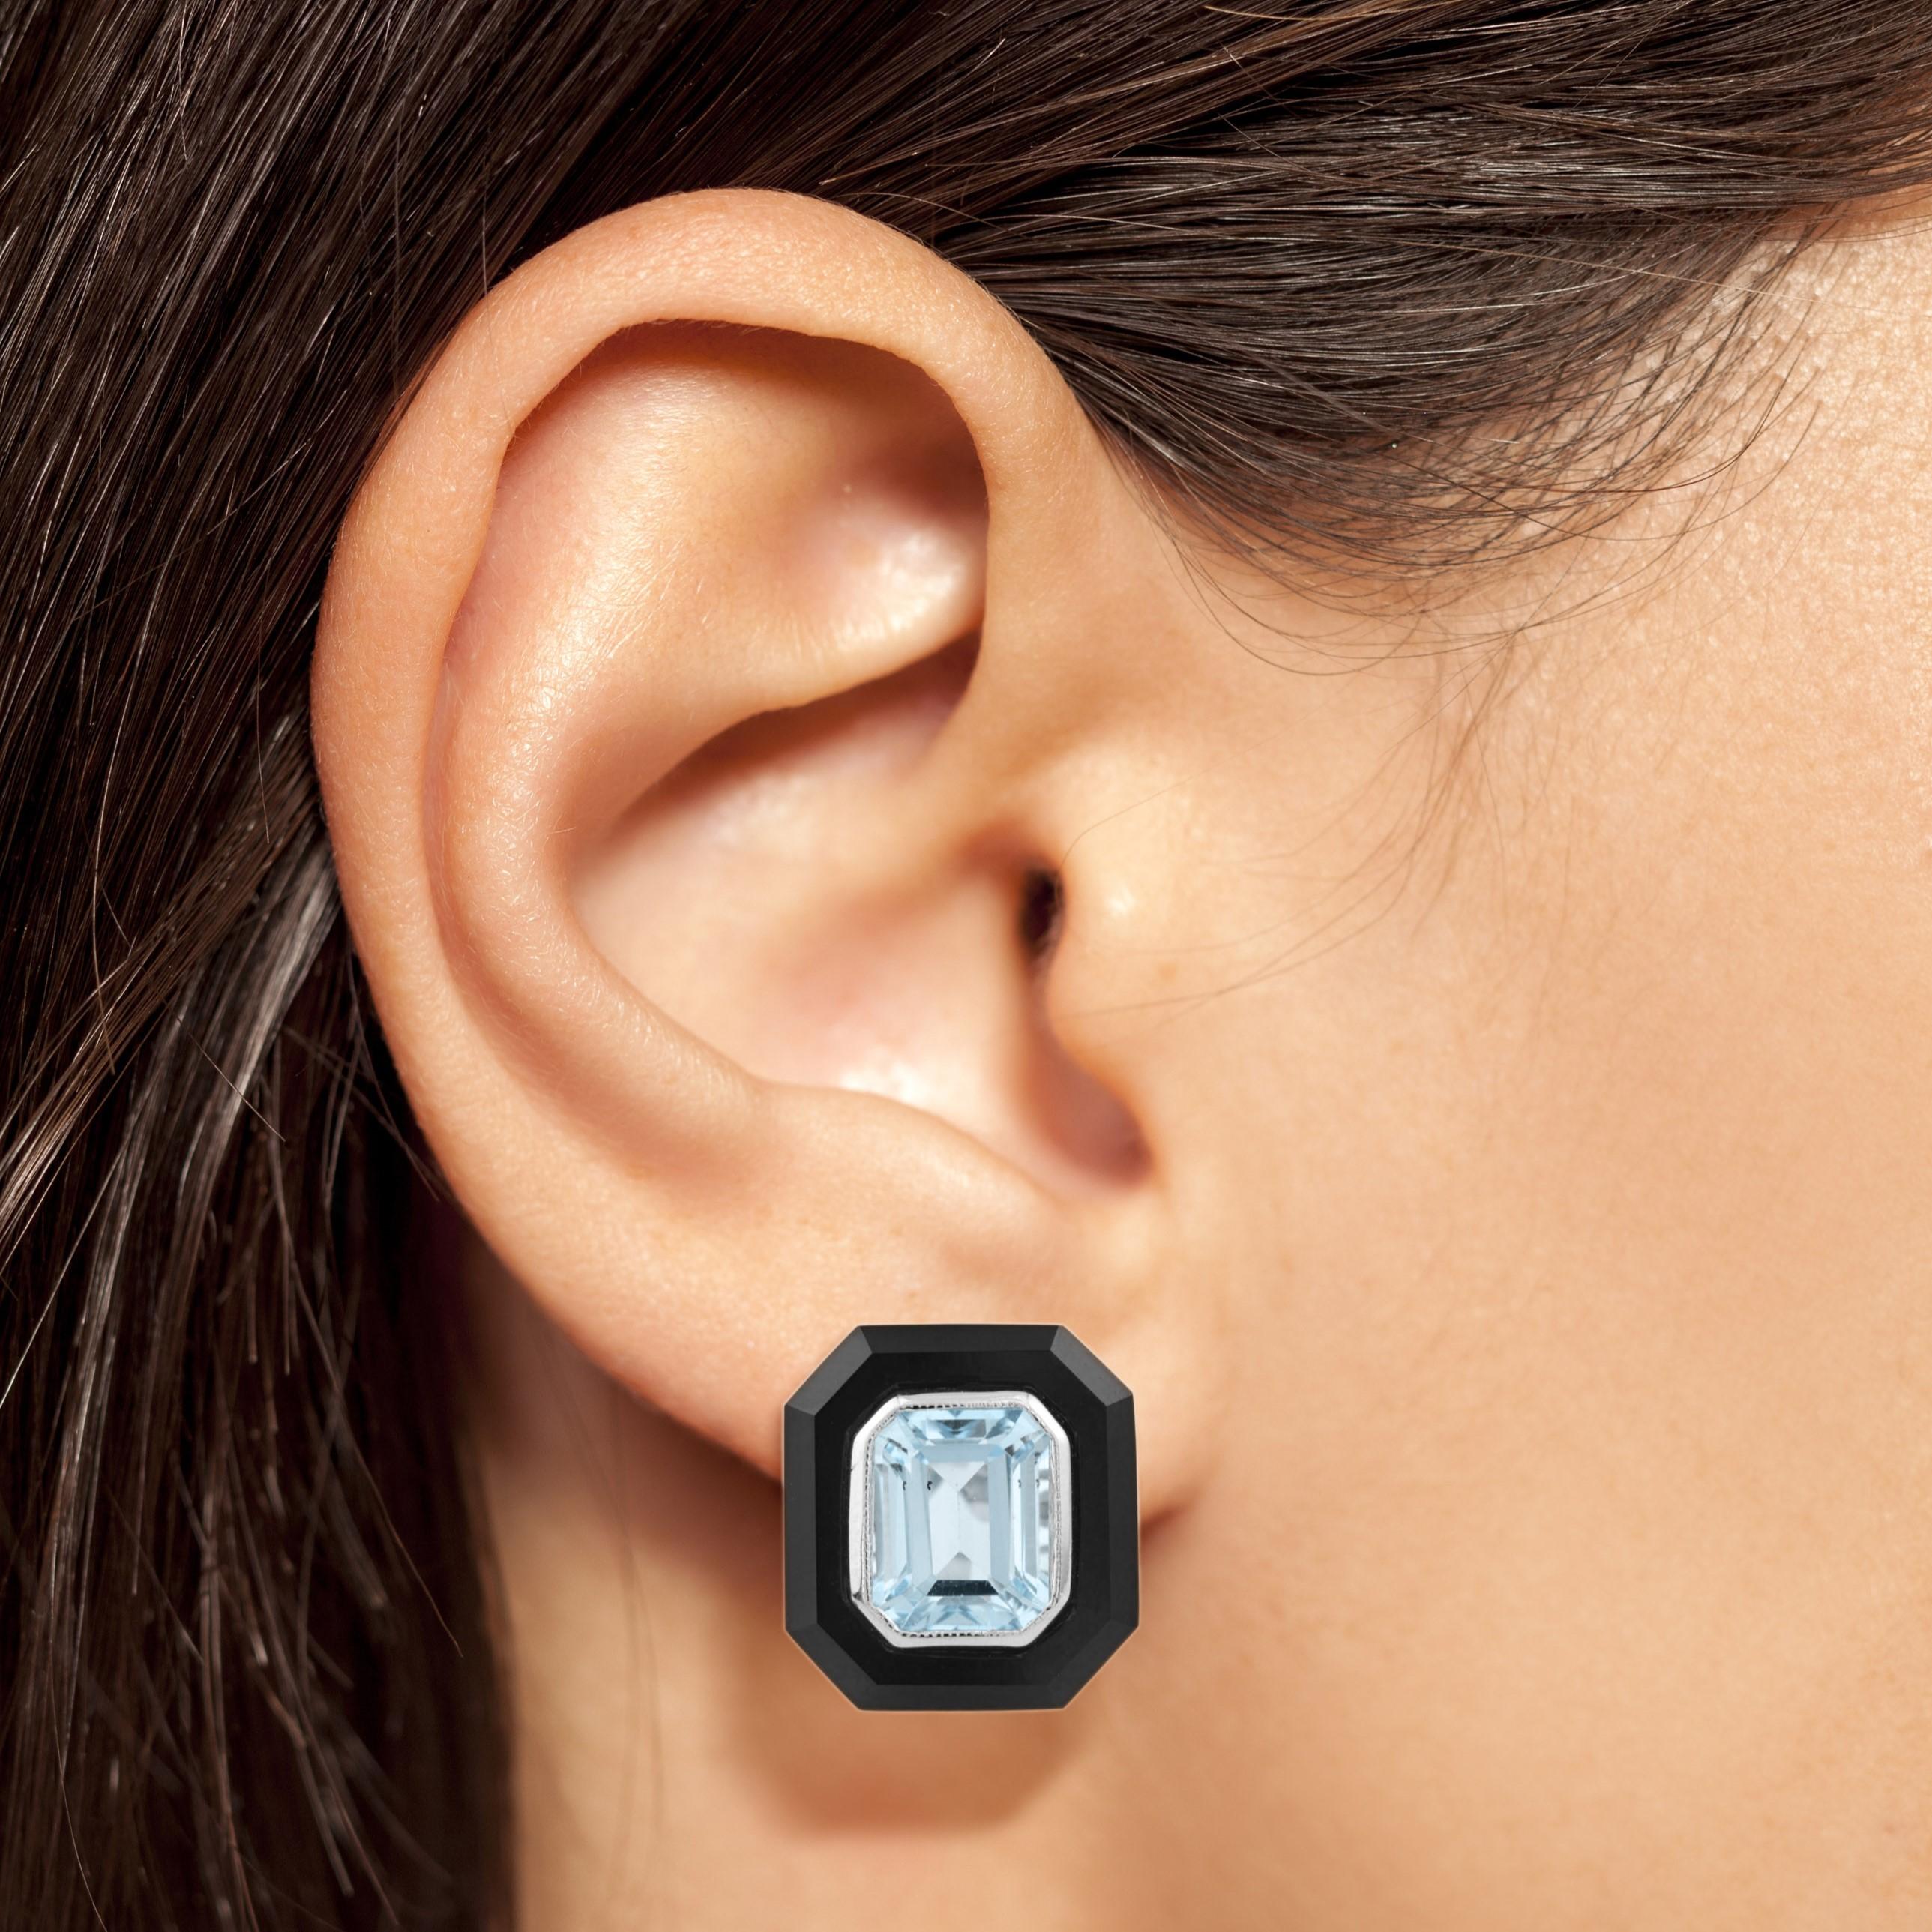 With radiant sparkle and bold contrast, these 18k white gold stud earrings are irresistible. Each features an emerald cut sky blue topaz, edged in outer frame of black onyx. 

Information
Style: Art Deco
Metal: 18K White Gold
Width: 14 mm.
Length: